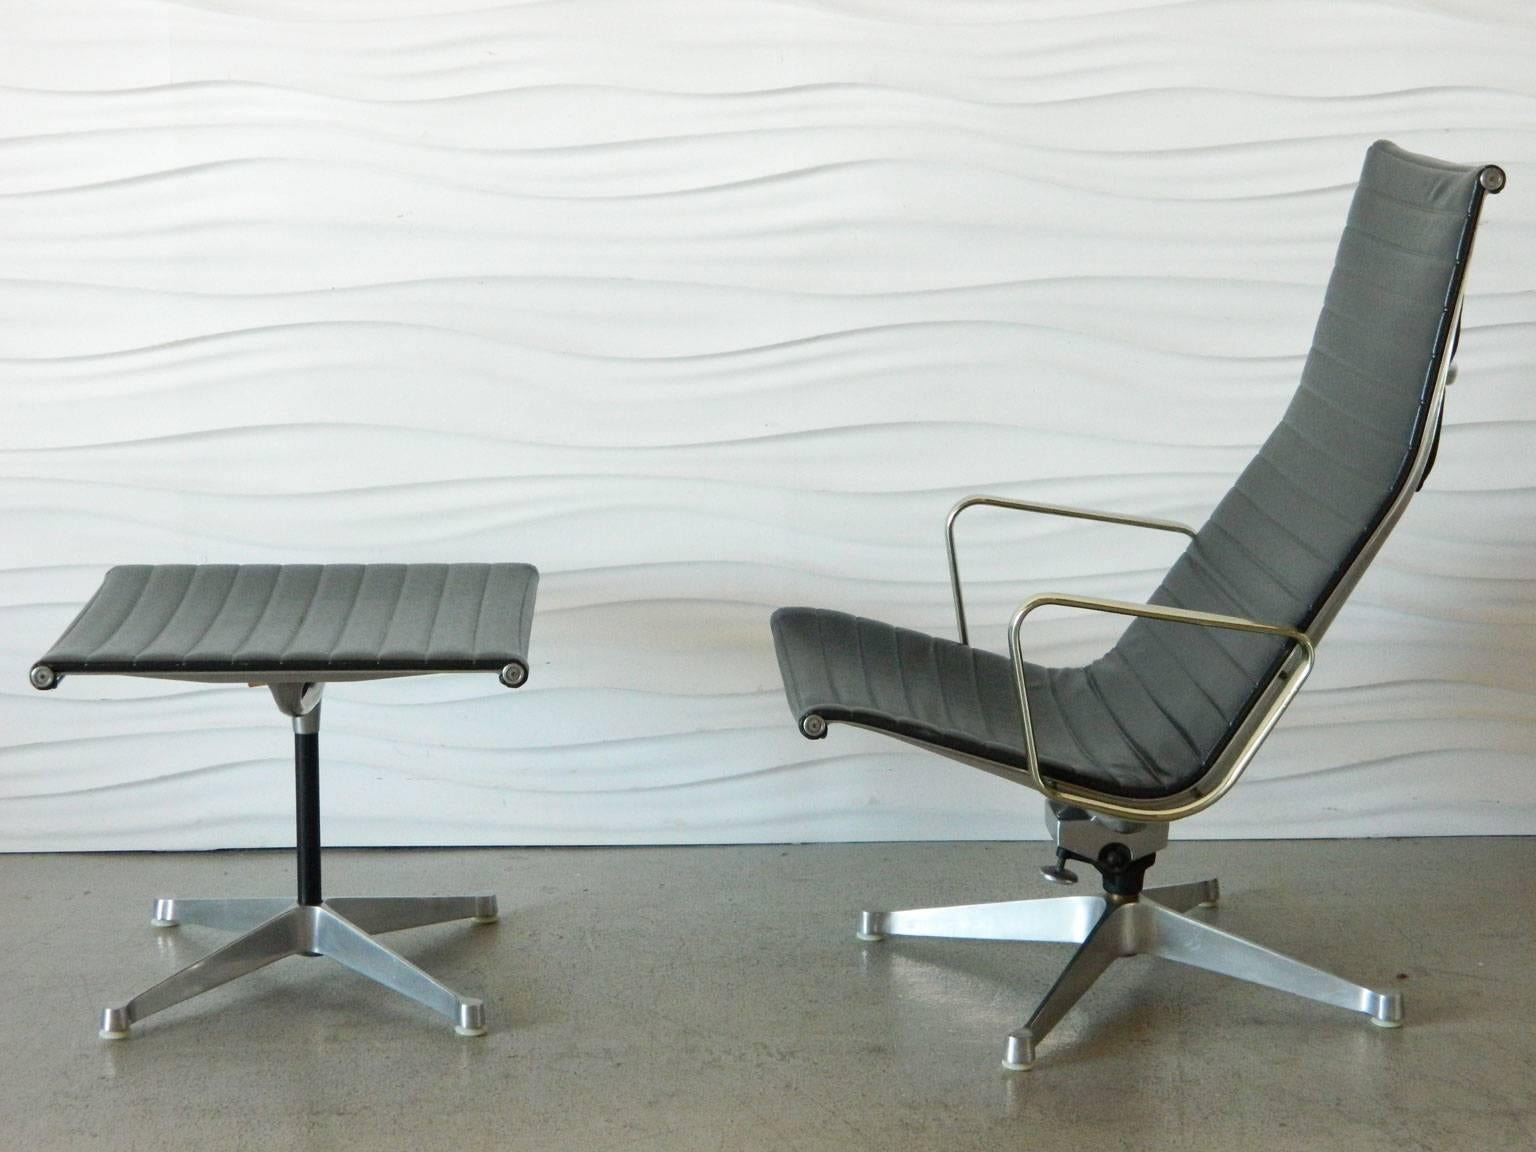 This classic Charles Eames Aluminum Group lounger with ottoman is covered in its original black vinyl and has an attached head pillow.

The lounger measures 25.5